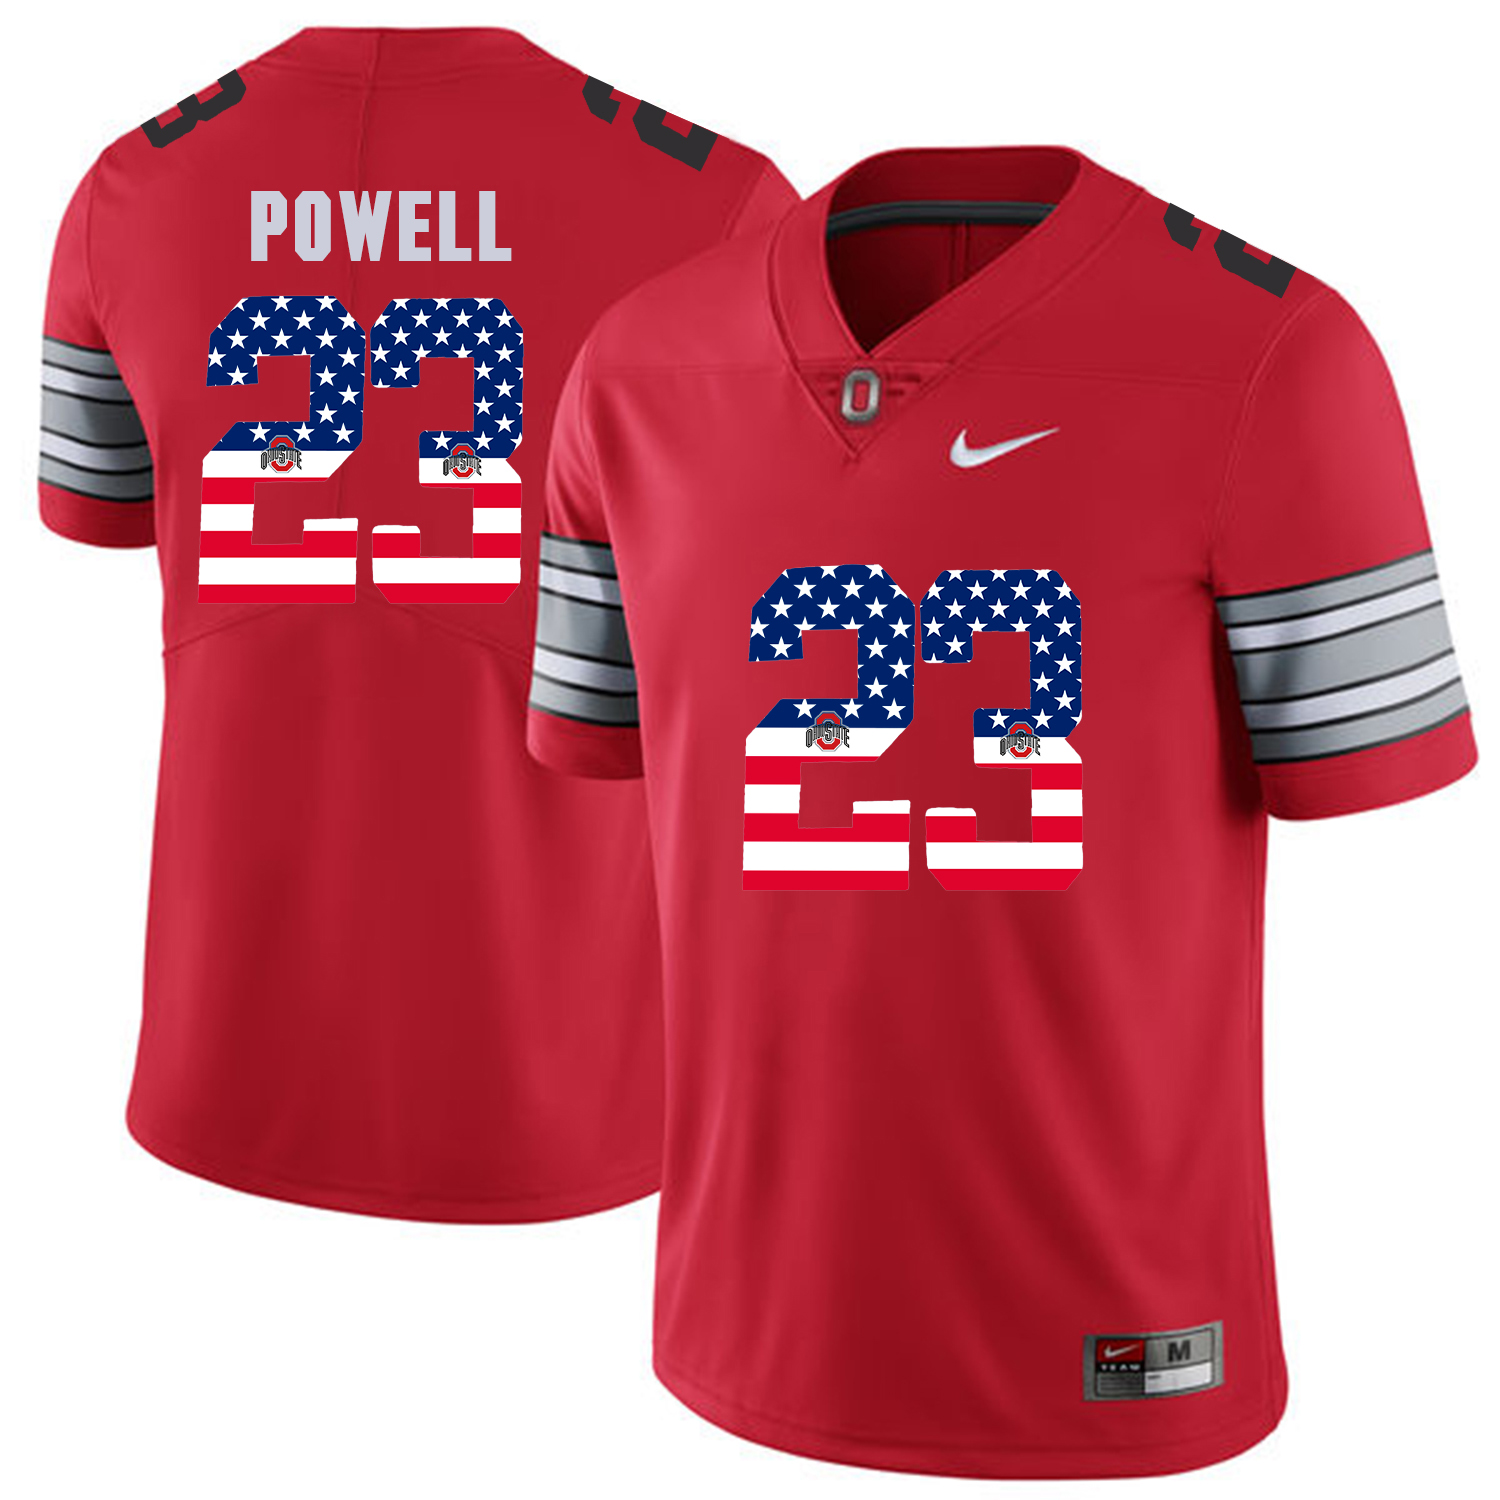 Men Ohio State 23 Powell Red Flag Customized NCAA Jerseys